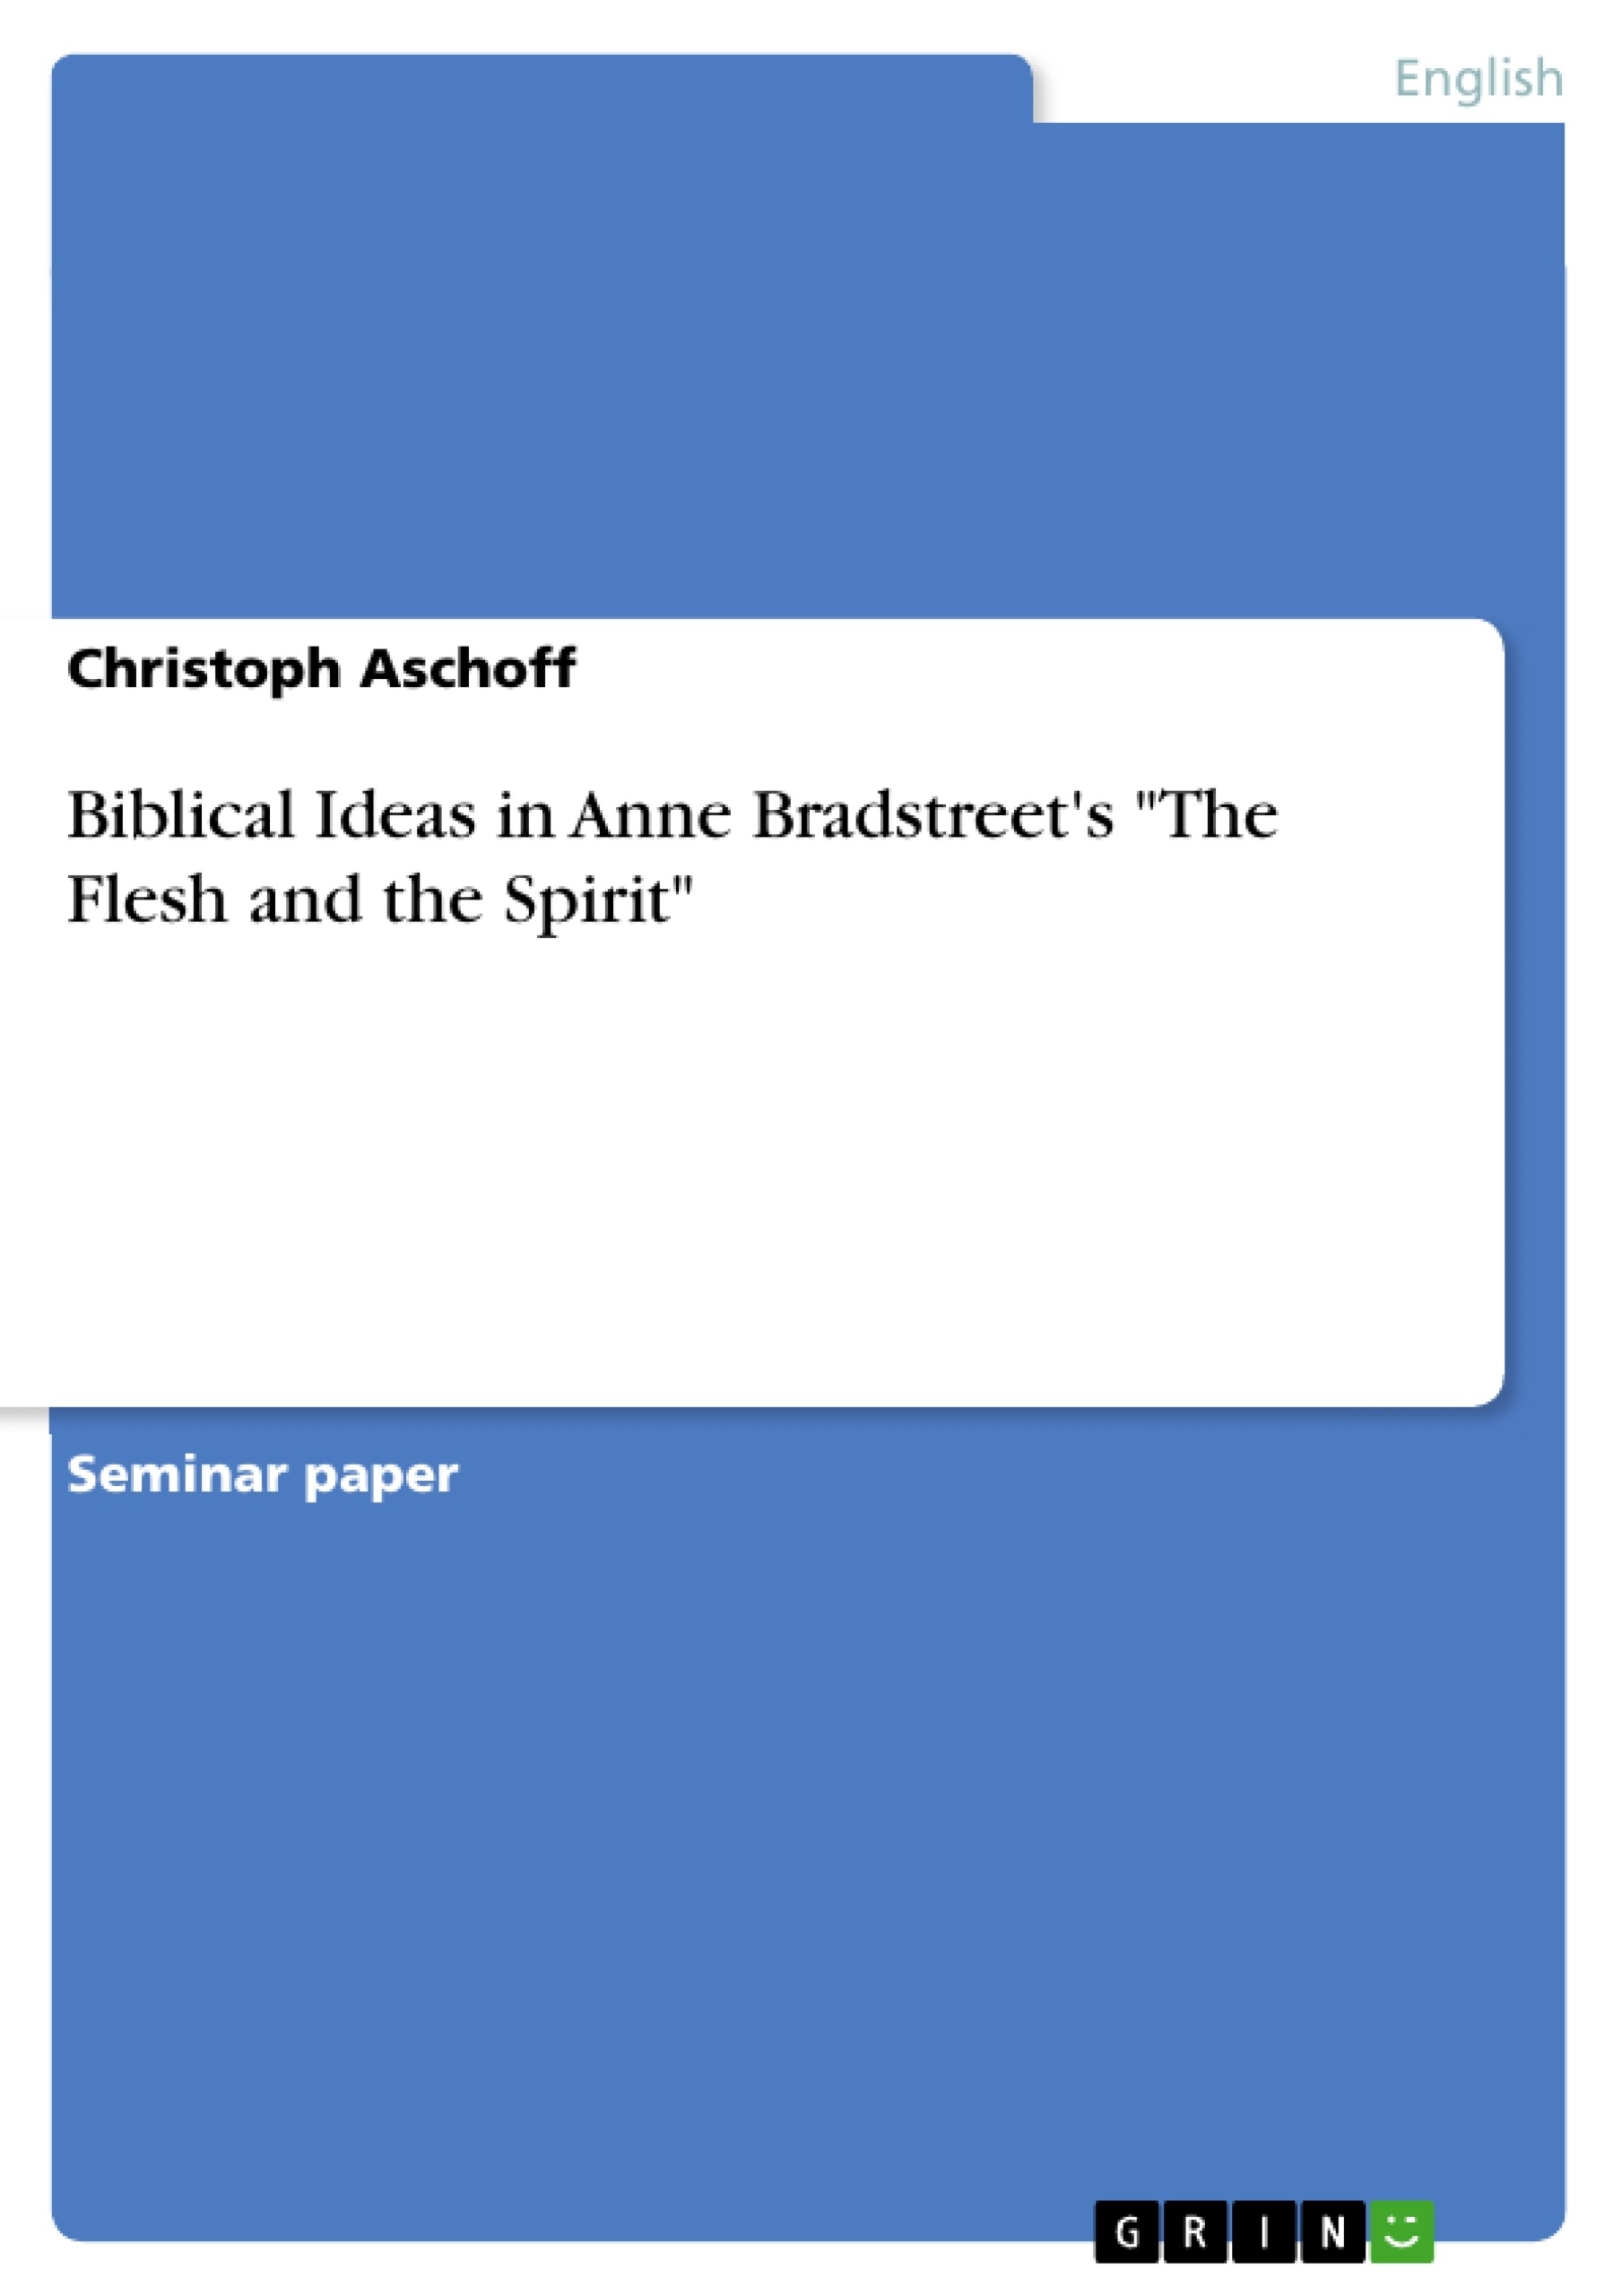 Title: Biblical Ideas in Anne Bradstreet's "The Flesh and the Spirit"